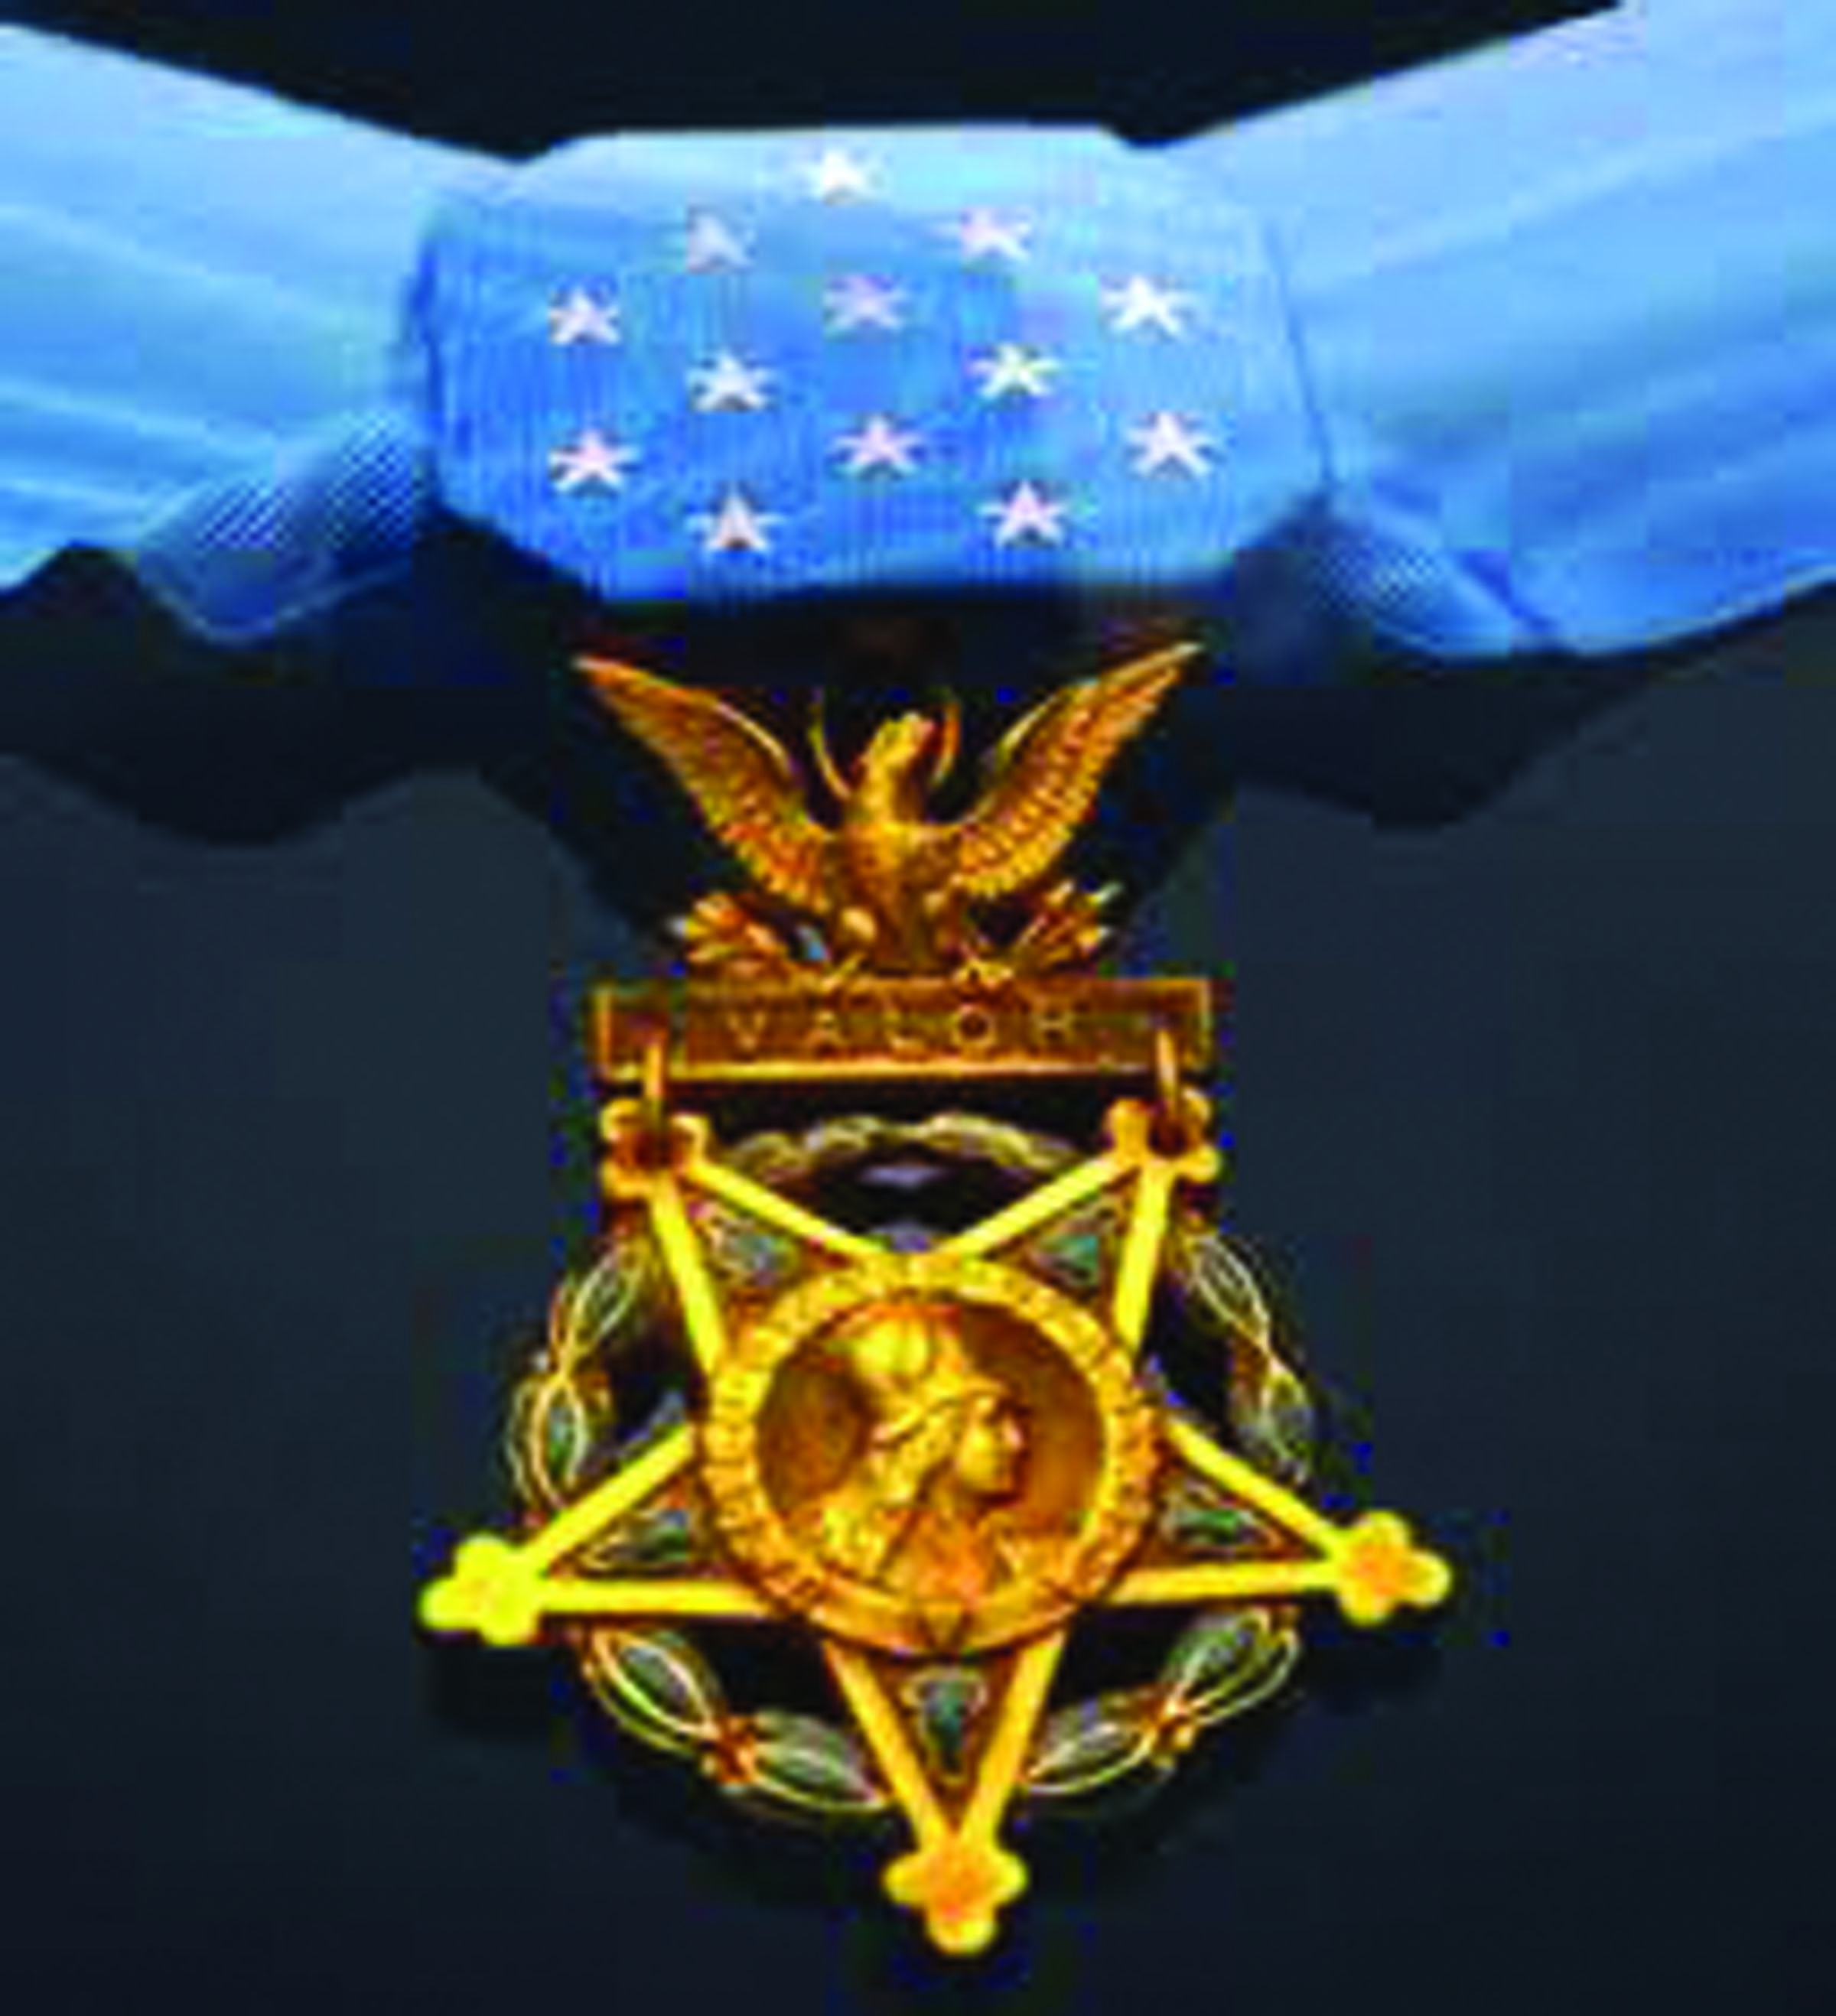 The Medal of Honor. Click on icon below for photos of the Medal of Honor recipients.